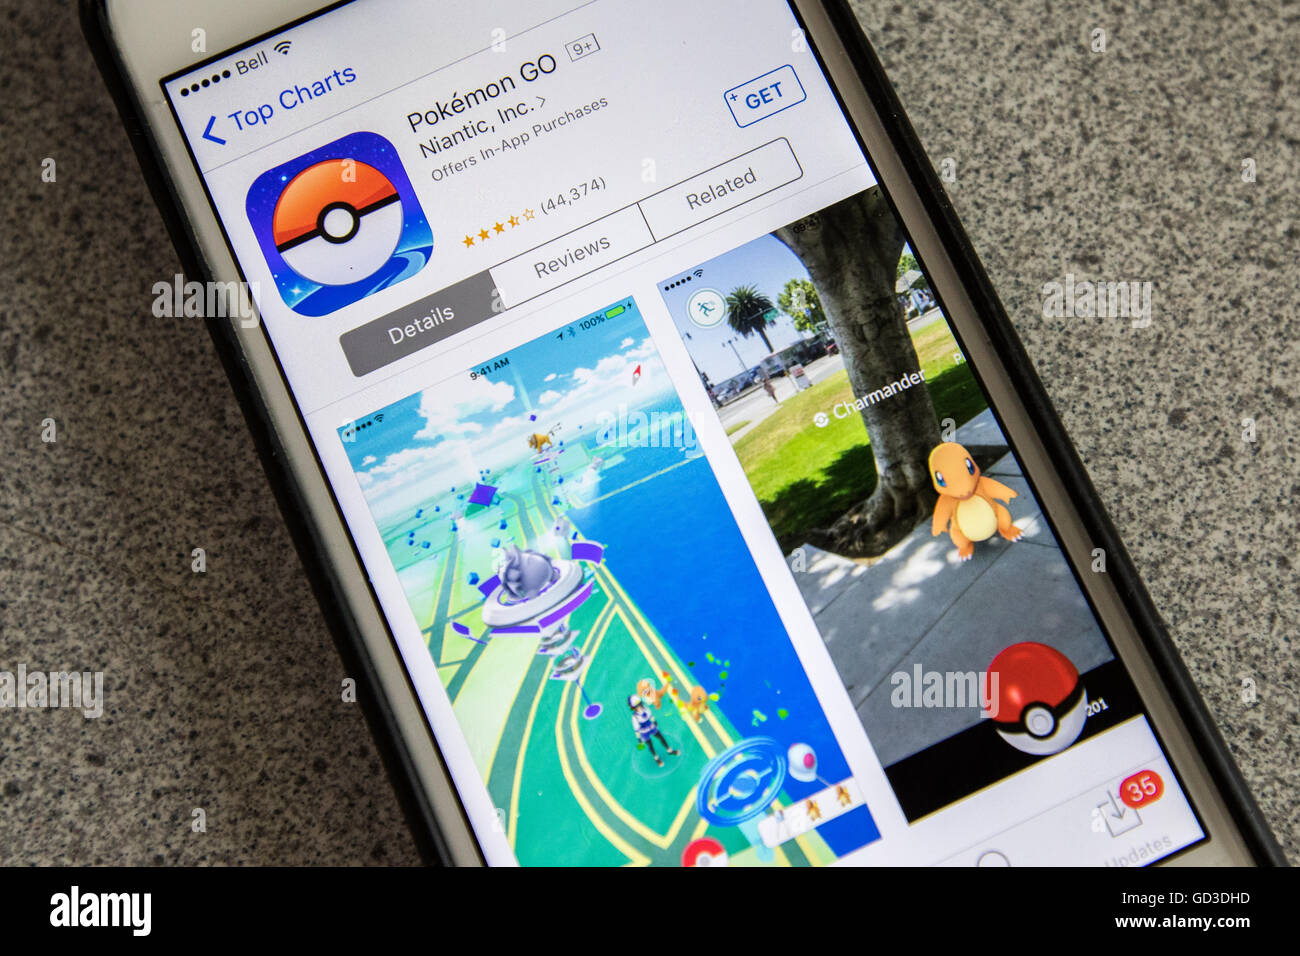 pokemon go for android tablet